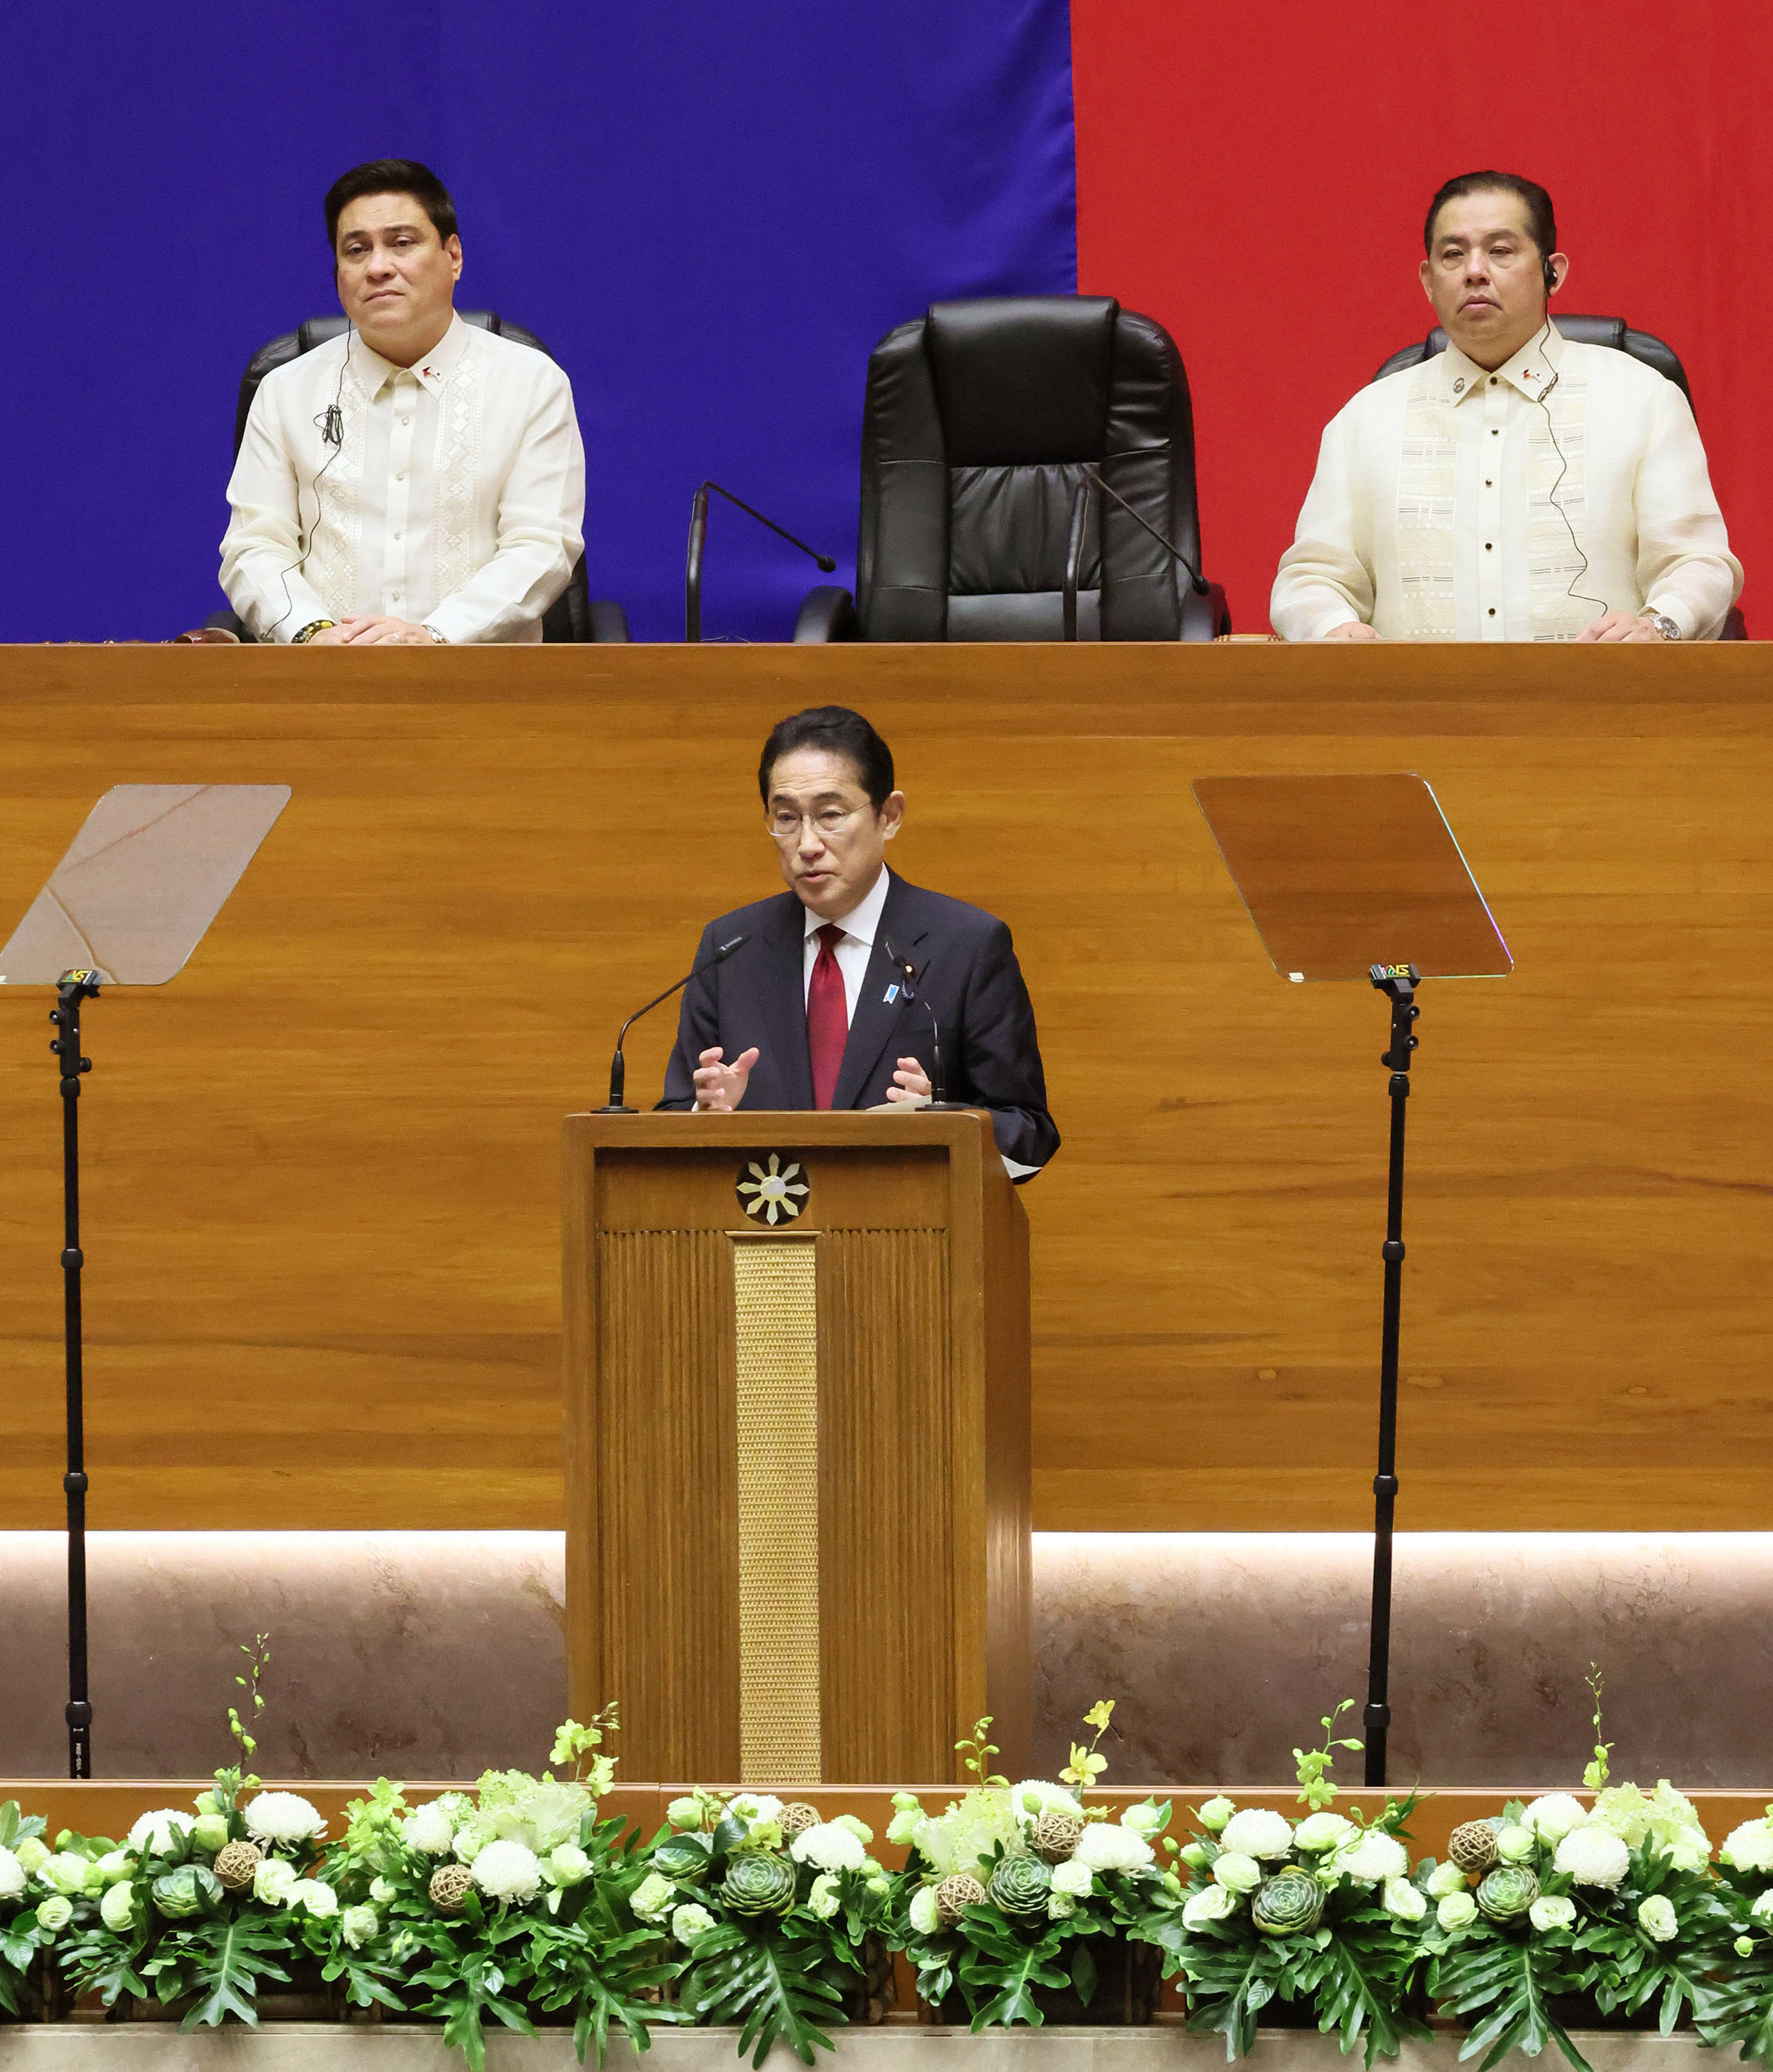 Prime Minister Kishida delivering a policy speech at the Joint Session of the Philippine Senate and House of Representatives (5)